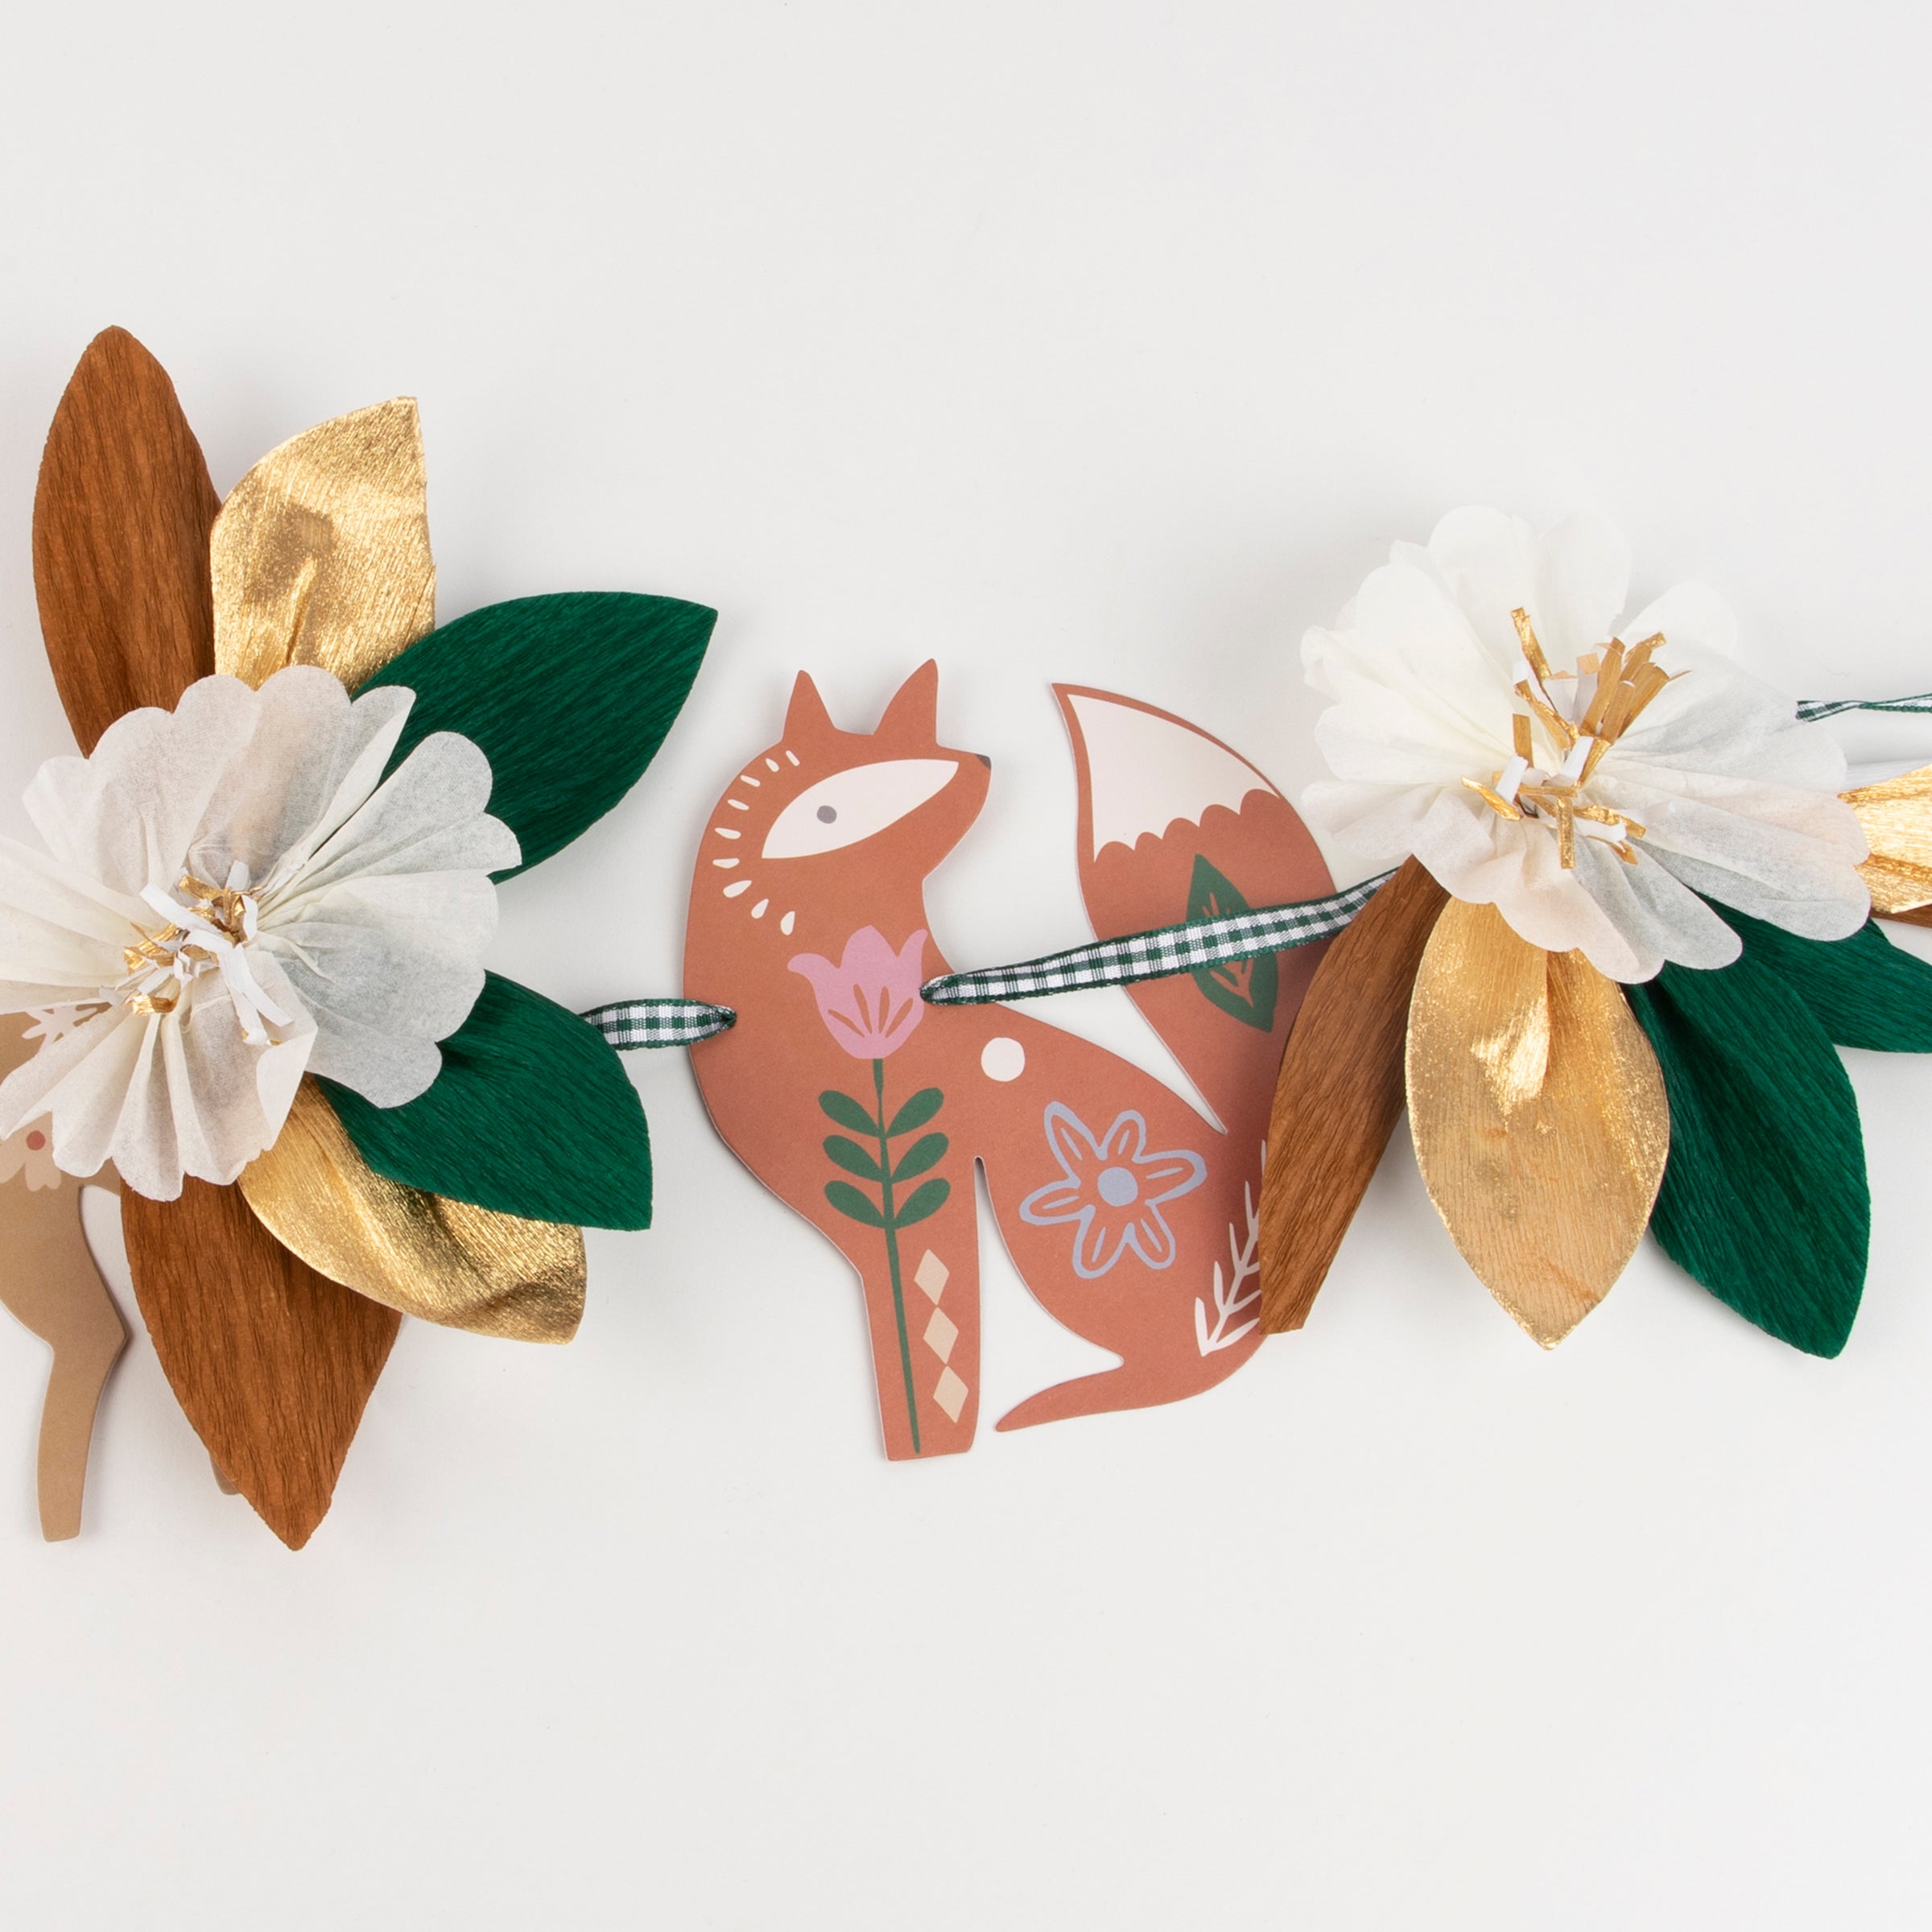 This beautiful autumn garland is made from crepe paper decorations including flowers and leaves.